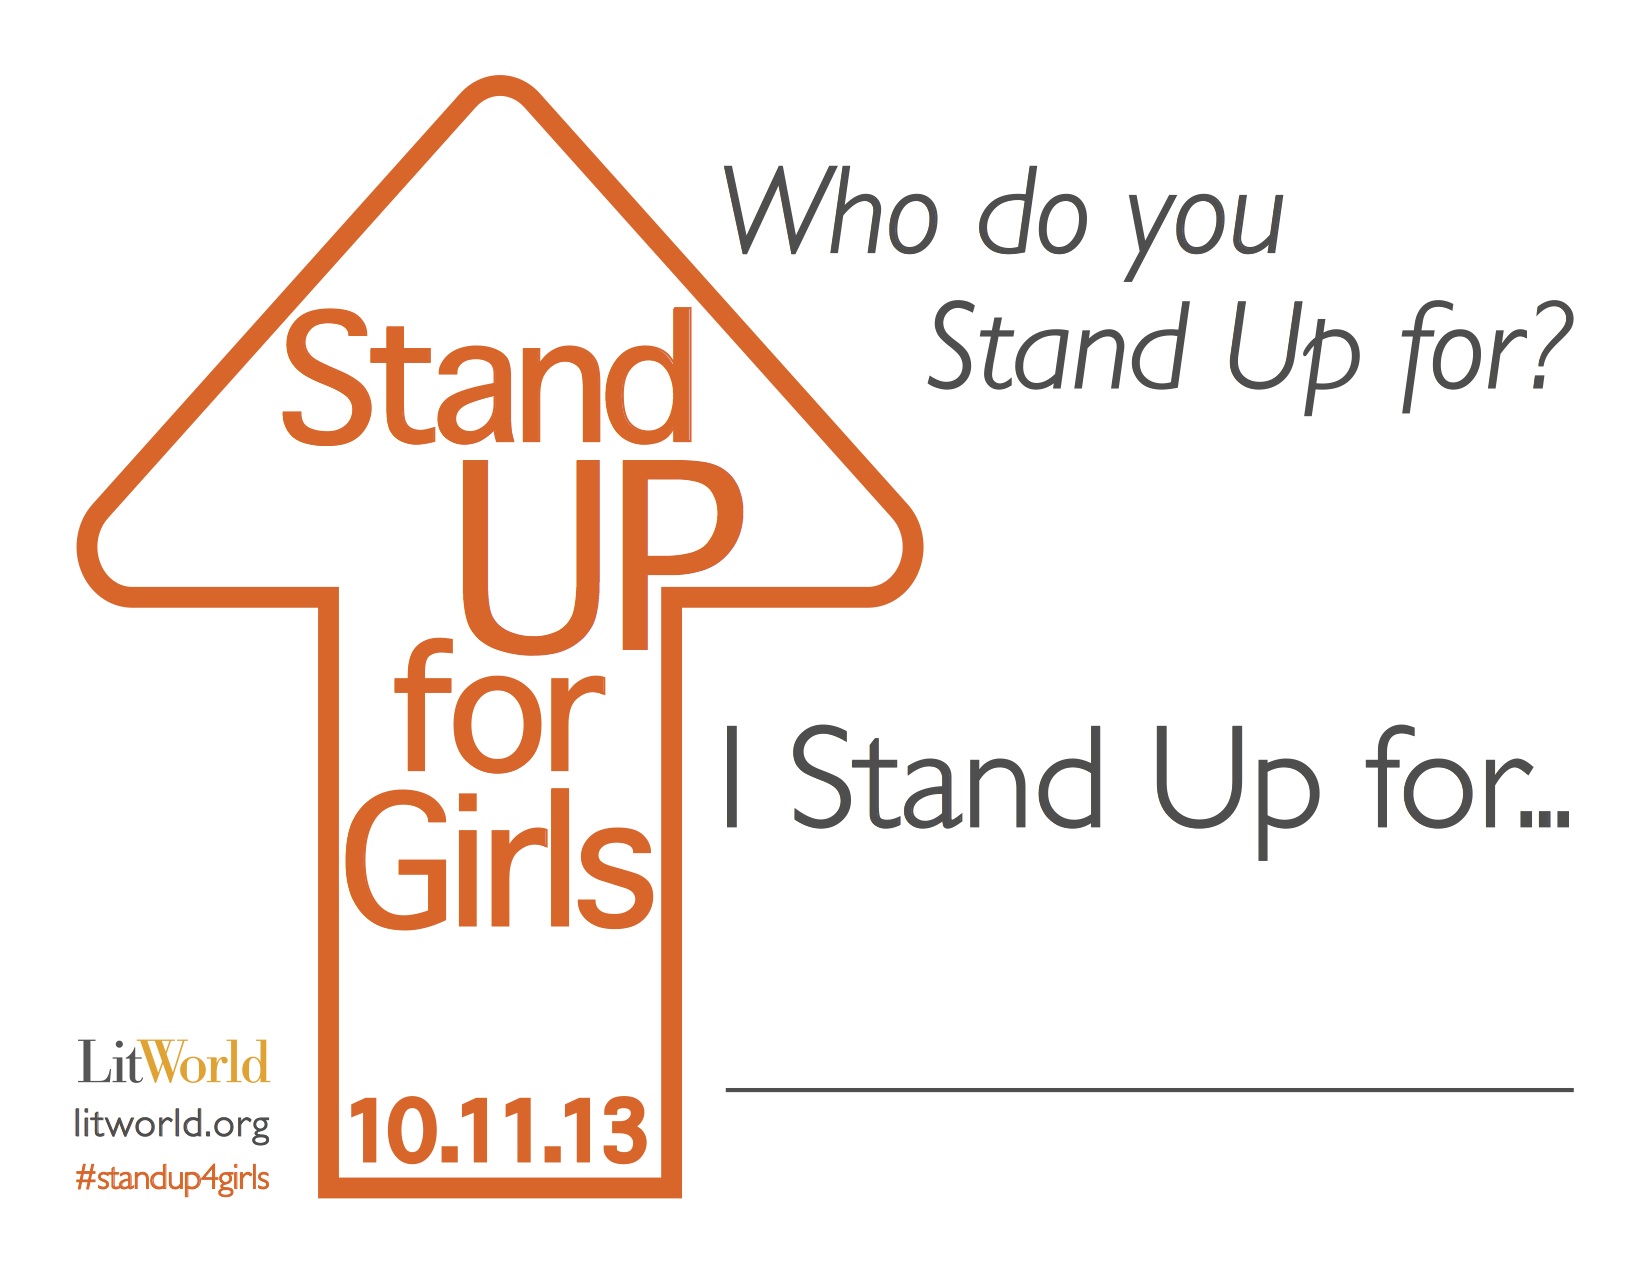 Stand Up for Girls with LitWorld.org